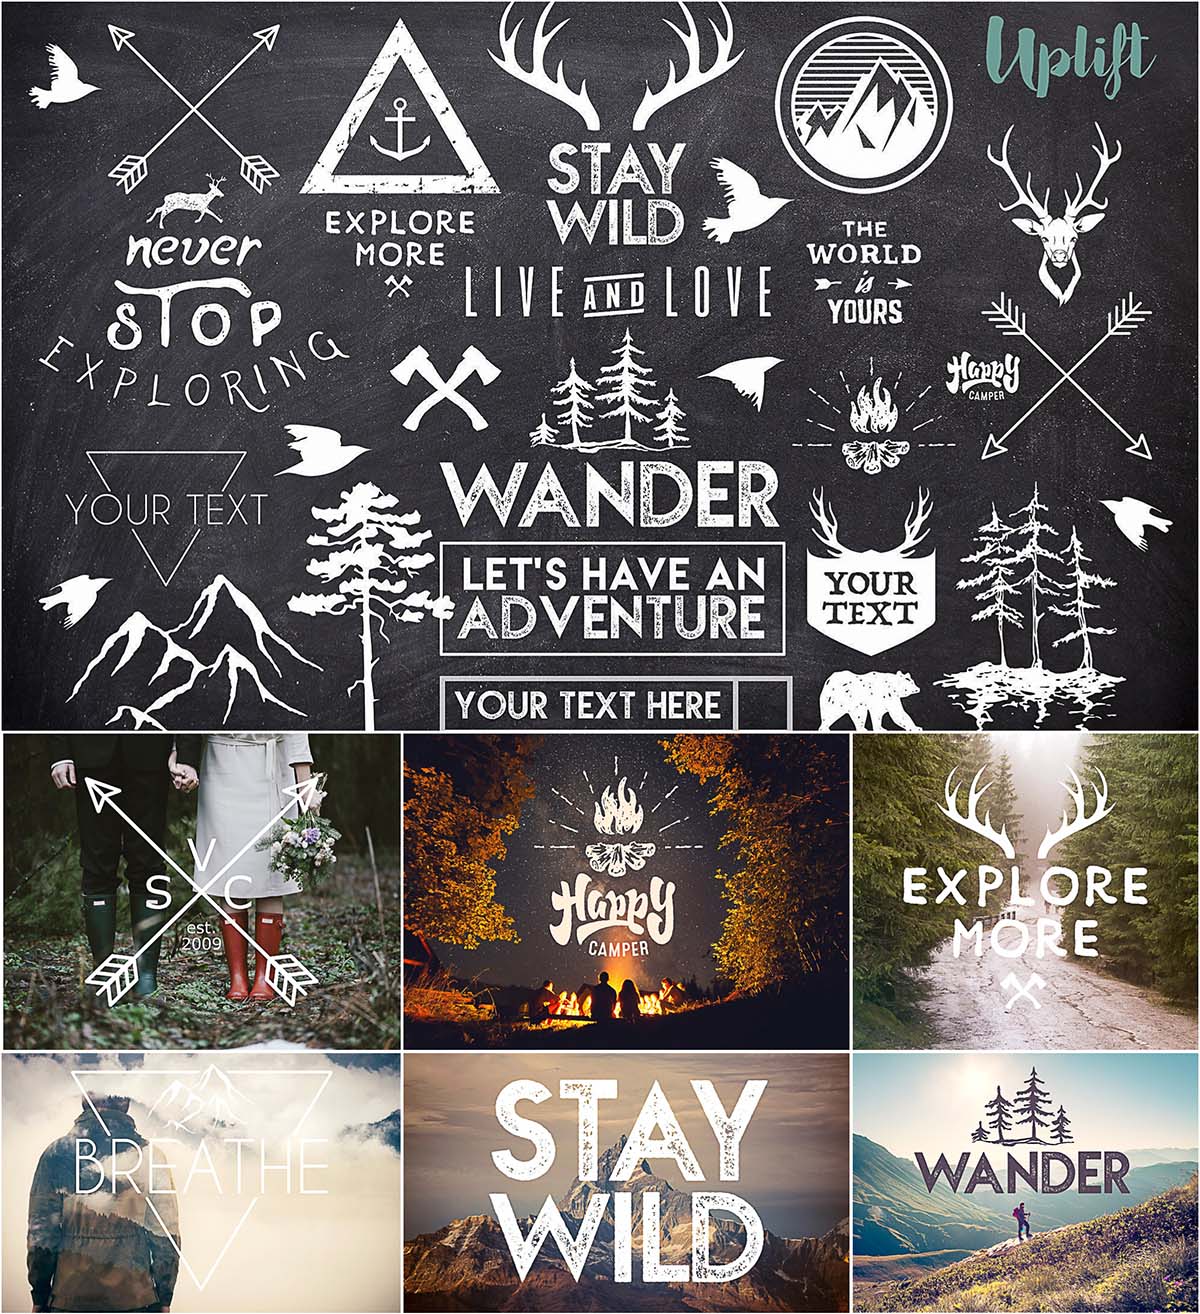 Wanderlust hipster overlays and illustrations